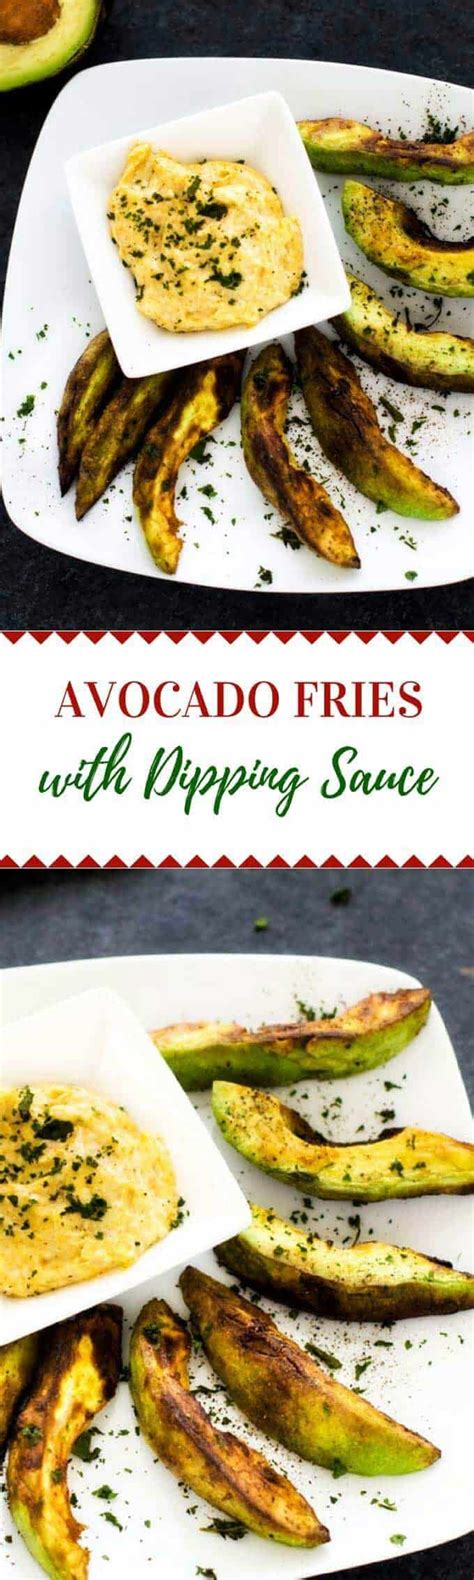 Avocado Fries With Dipping Sauce Wendy Polisi